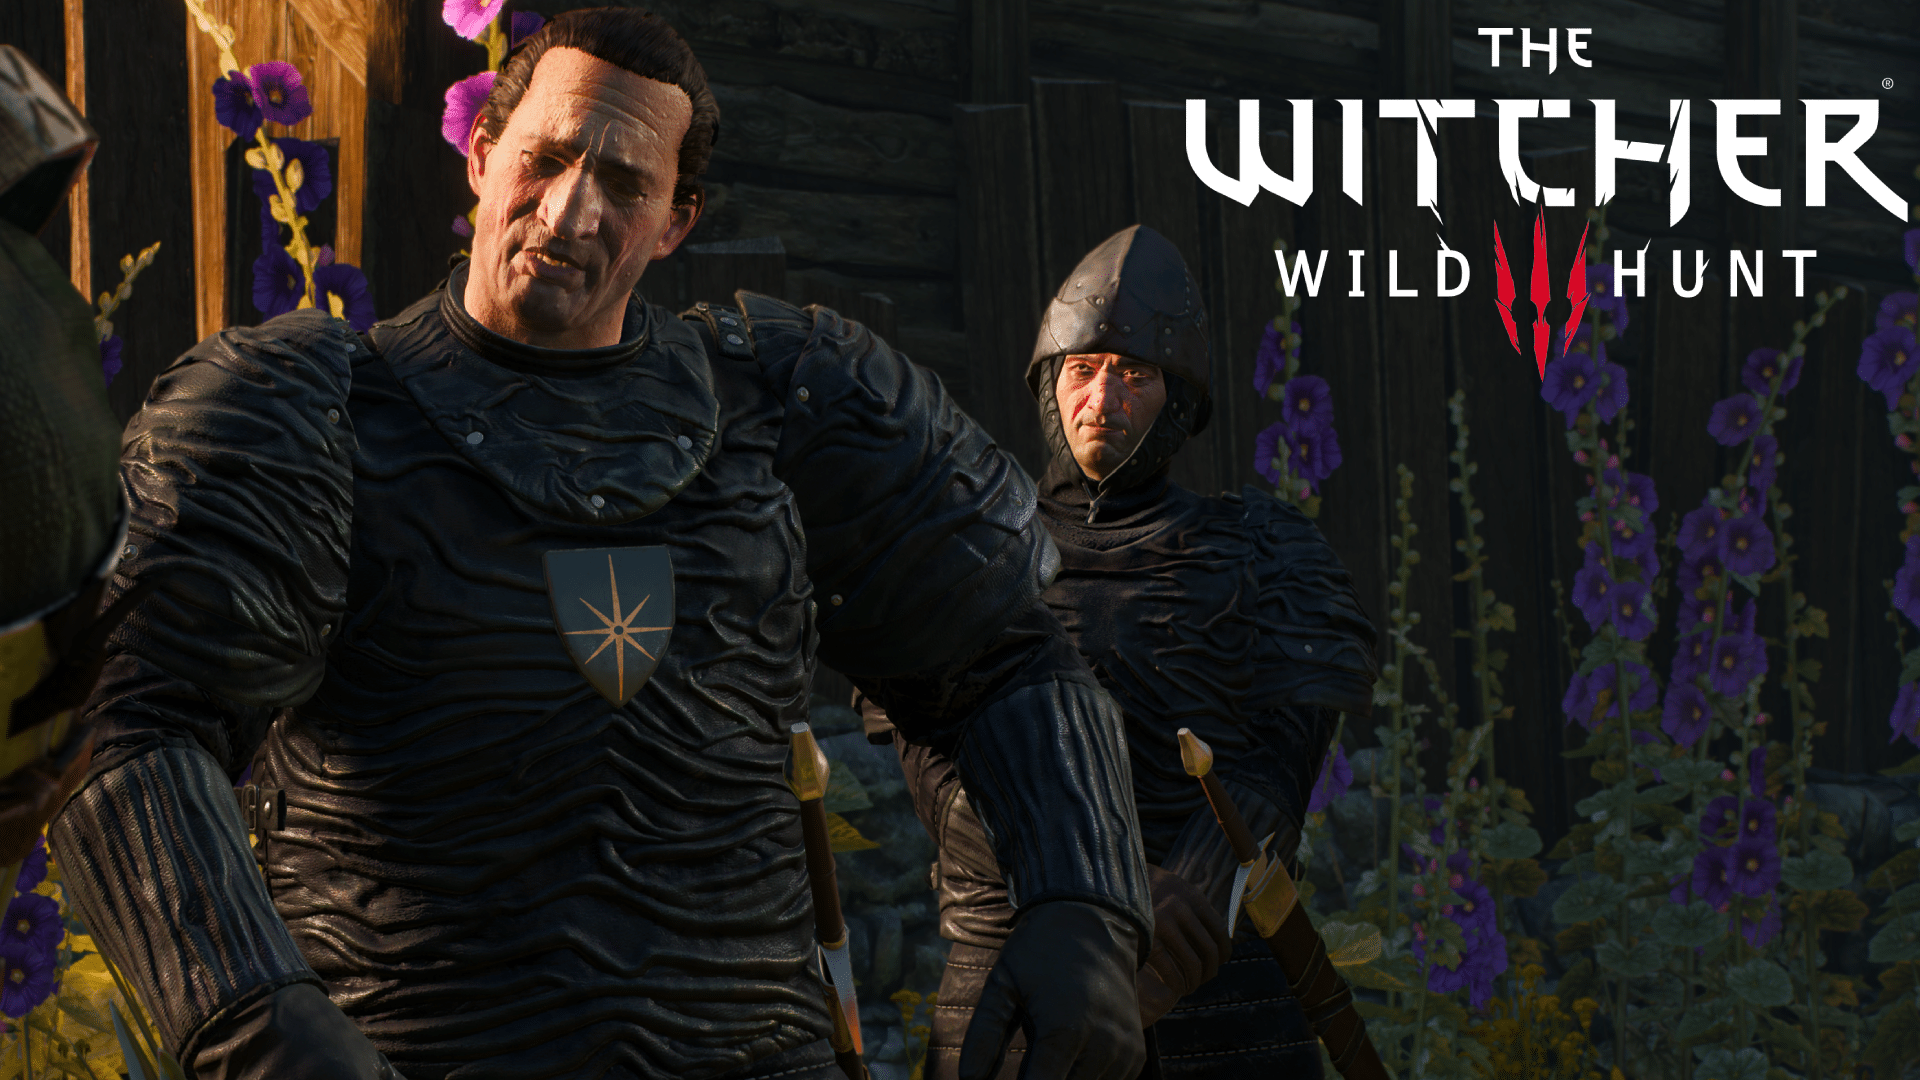 The Witcher 3 - How to Enabled Netflix's Scrotum Outfit for Nilfgaardians